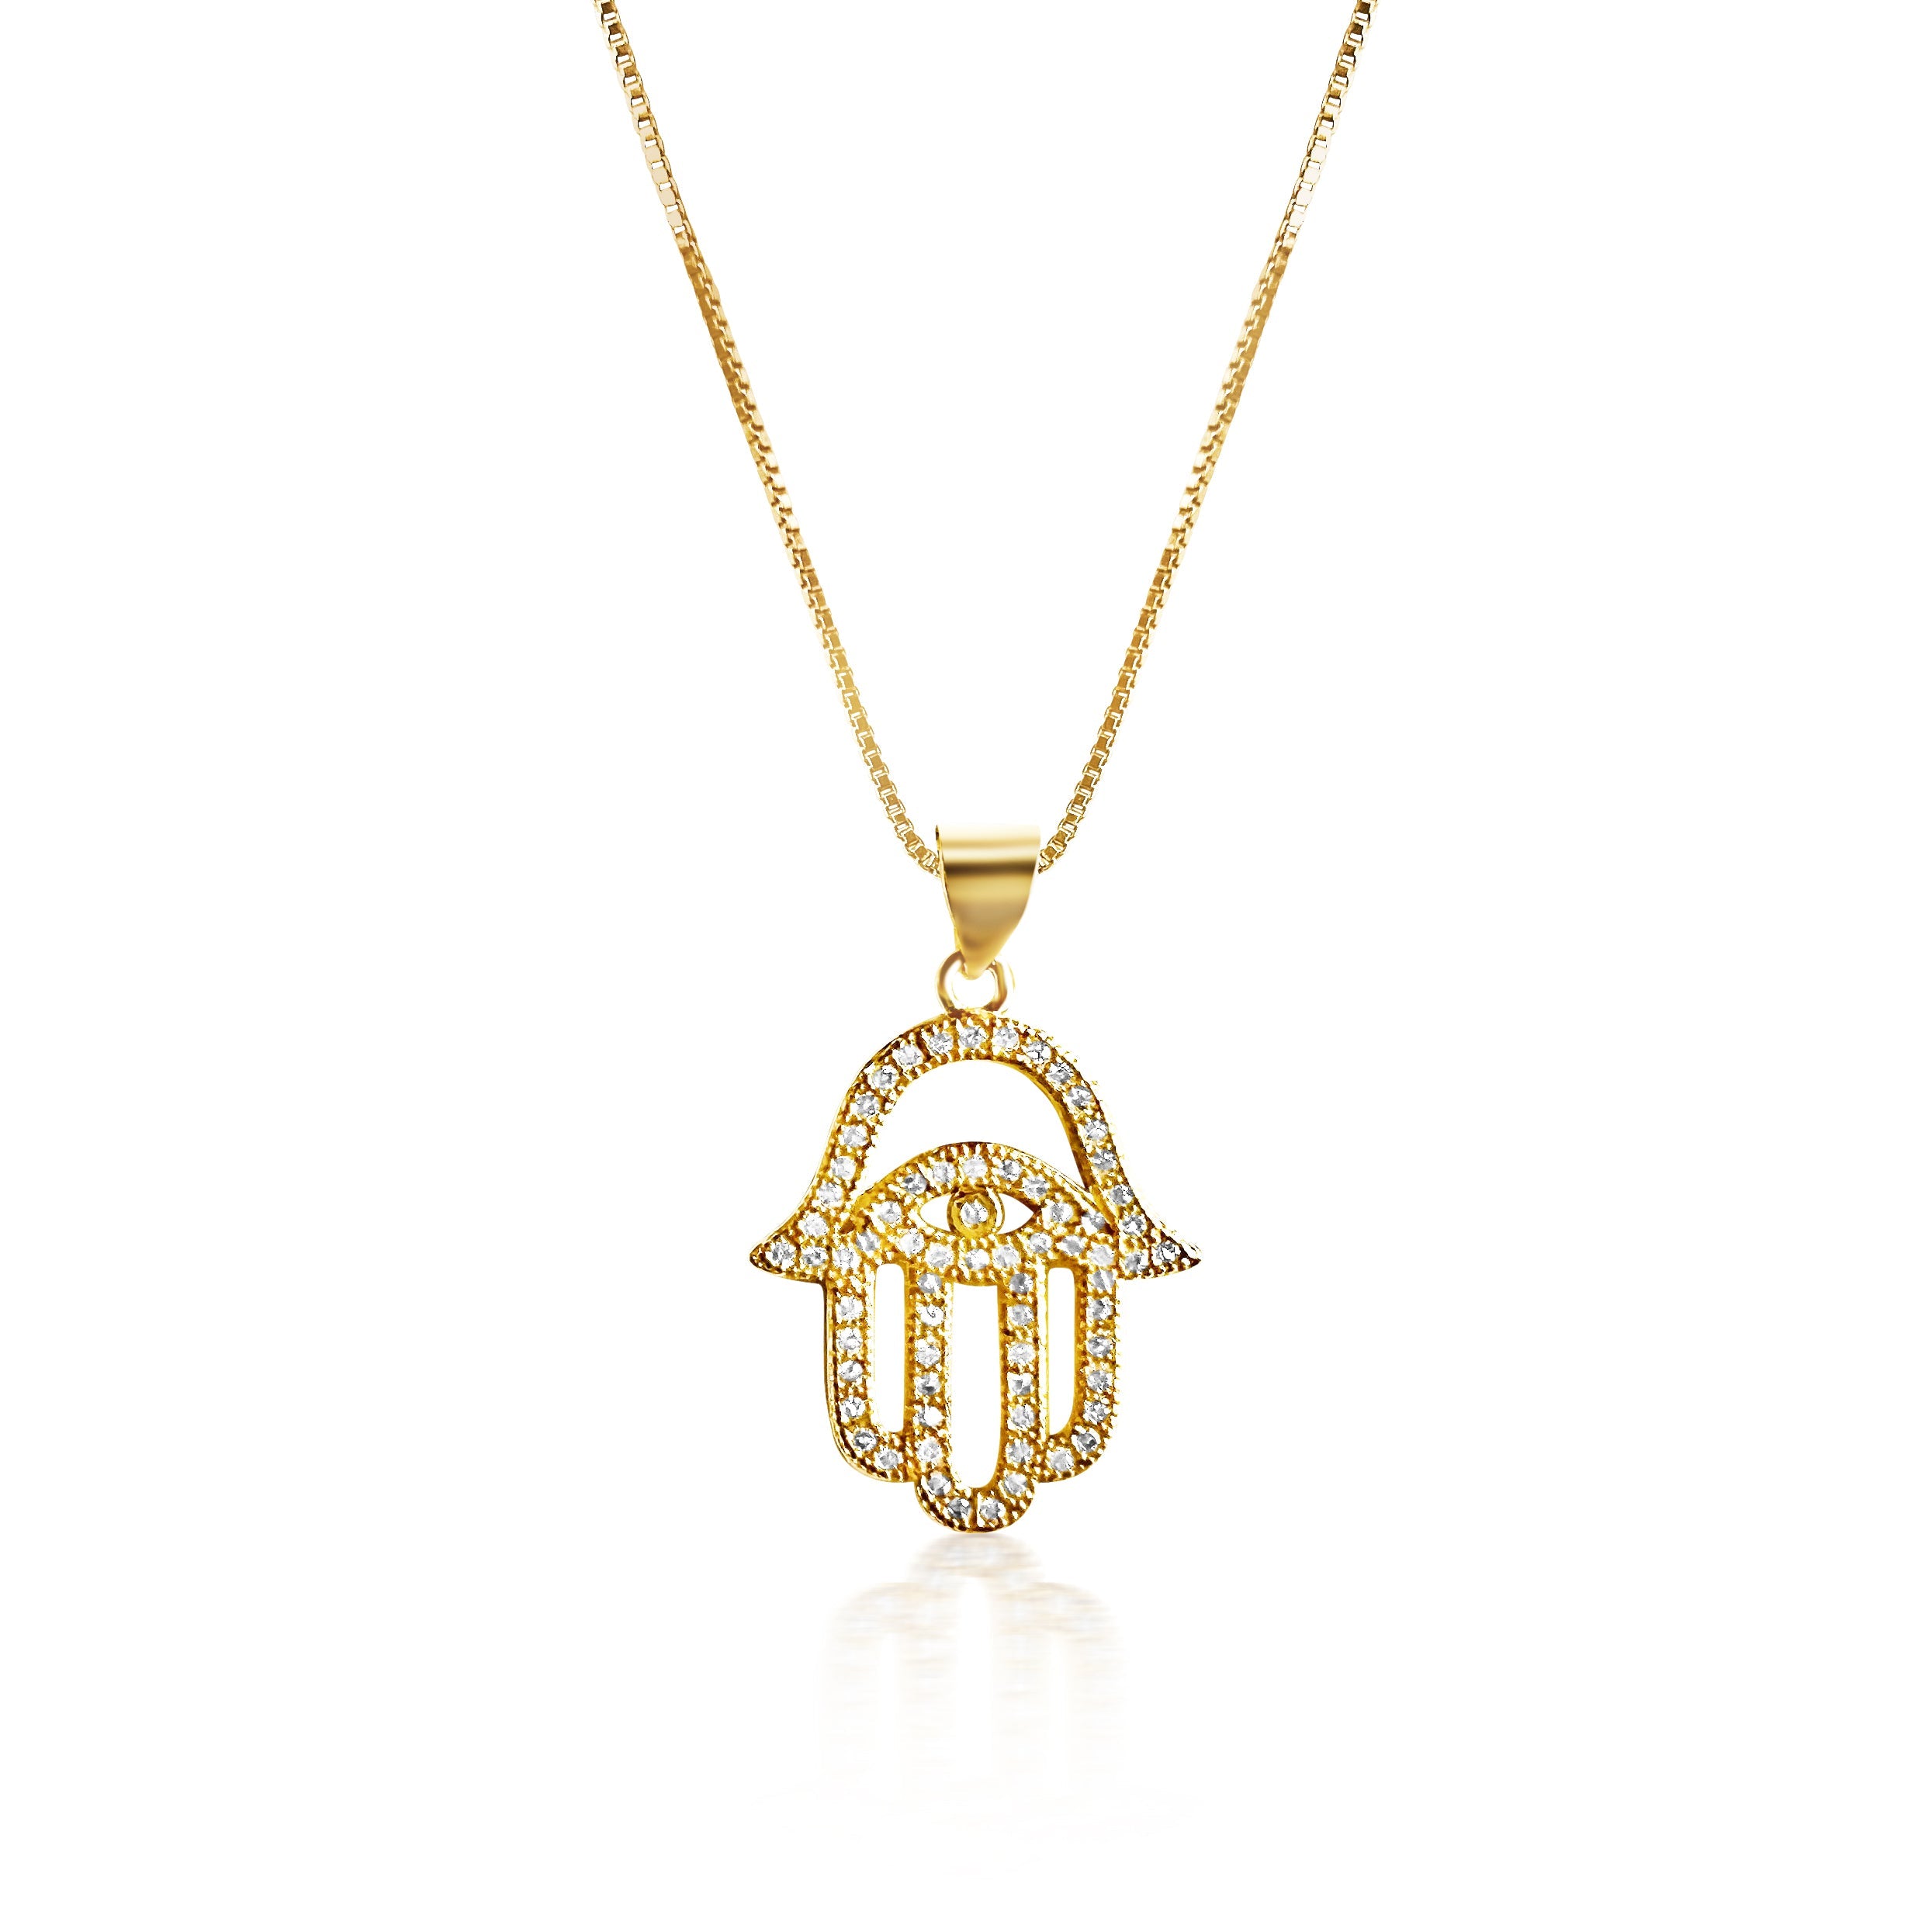 Held in Wisdom Hamsa Hand Necklace - Gold Filled